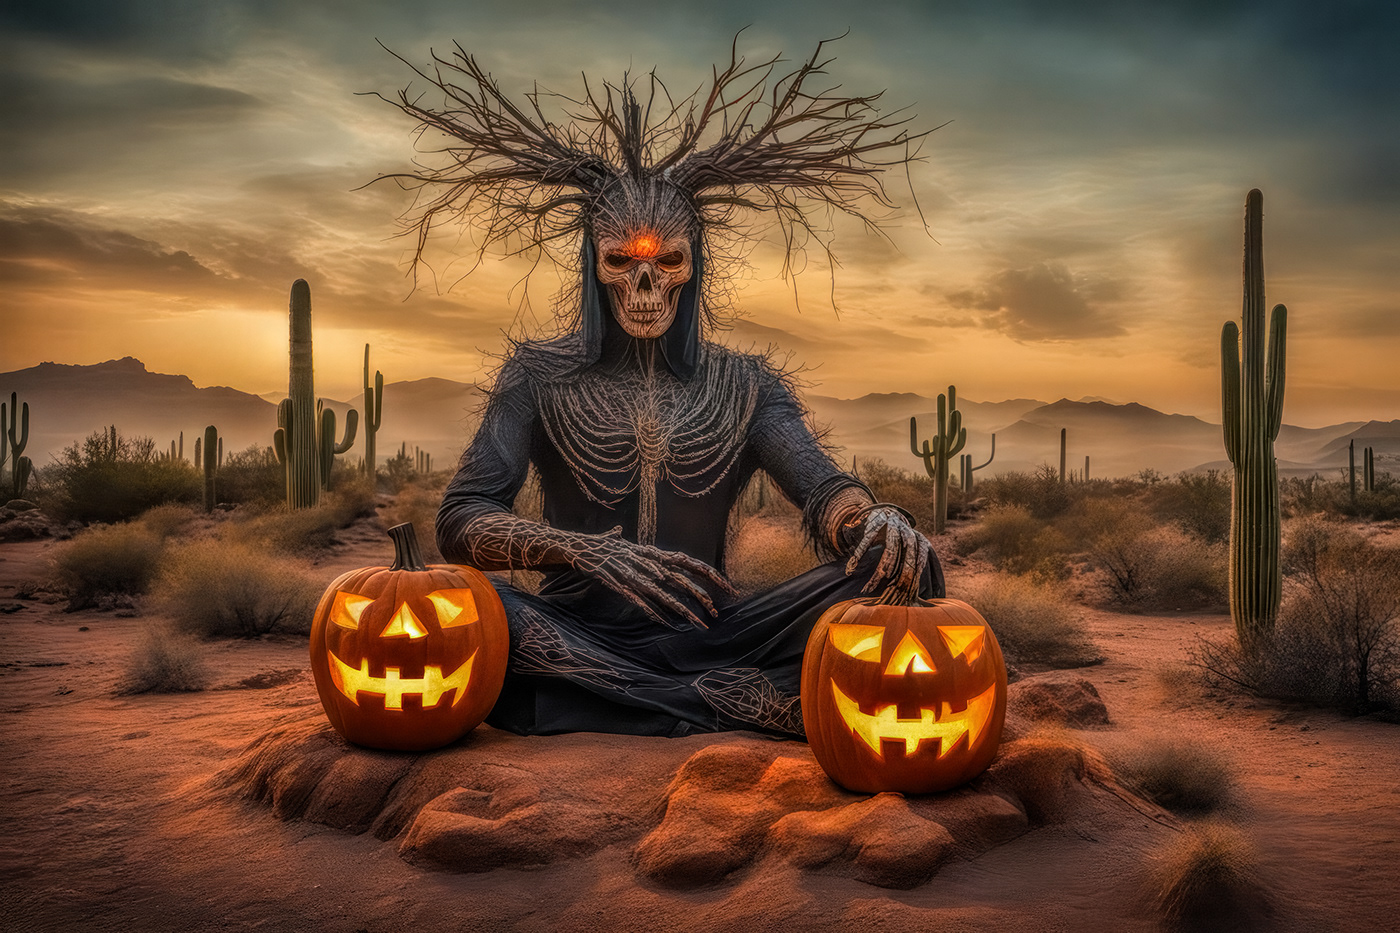 The Desert Southwest Cryptids are working away on their jack o lanterns in preparation for Halloween